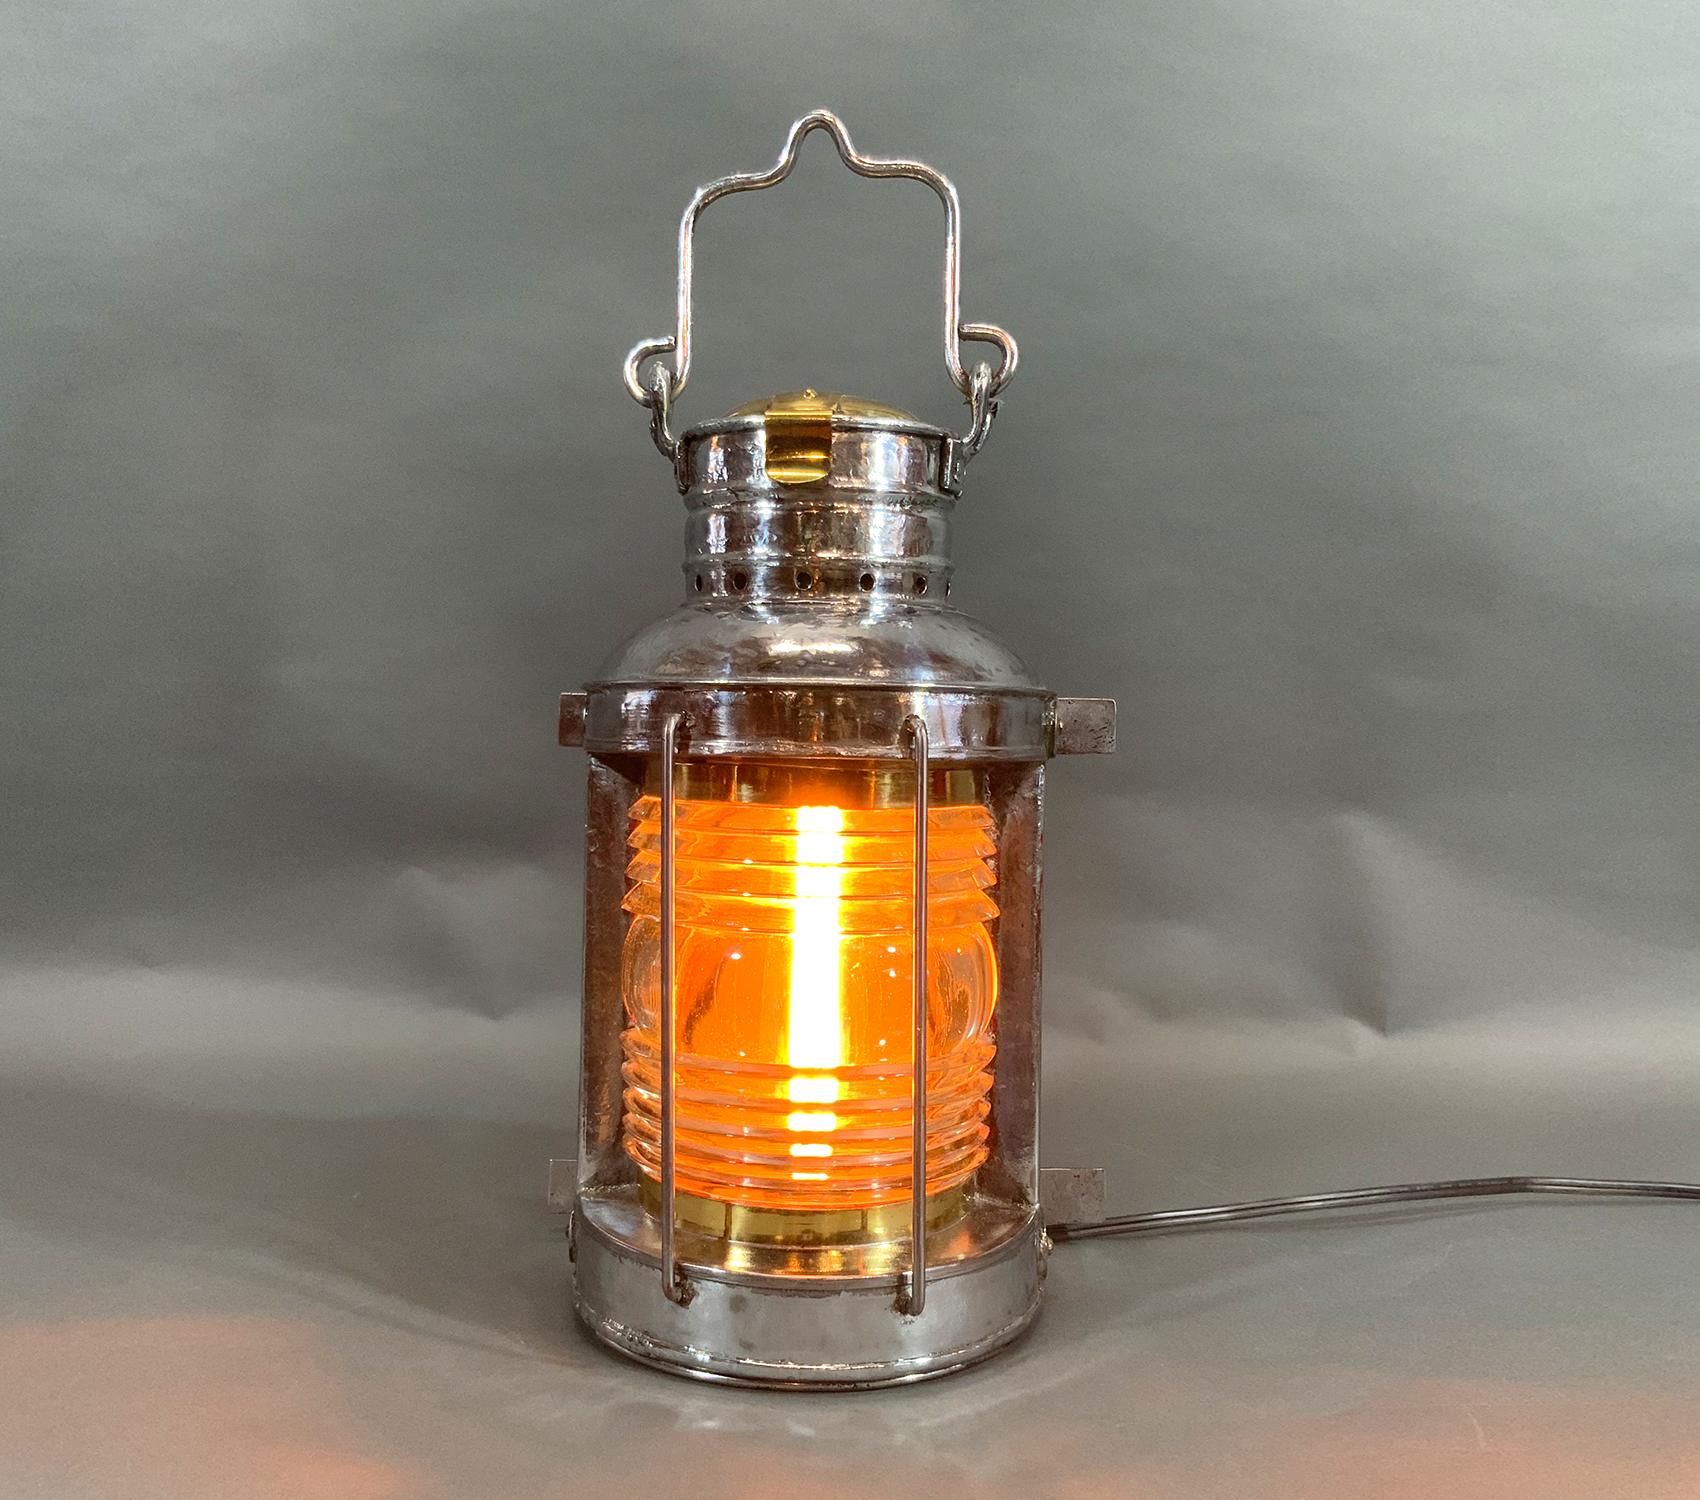 Ships masthead lantern with Fresnel glass lens, hinged door, Fresnel glass lens, hinged brass cap and protective steel bars. Wired with a power cord. 

Weight: 9LBS
Overall Dimensions: 14” H x 10” L x 7” D
Made: American
Material: Steel
Date: